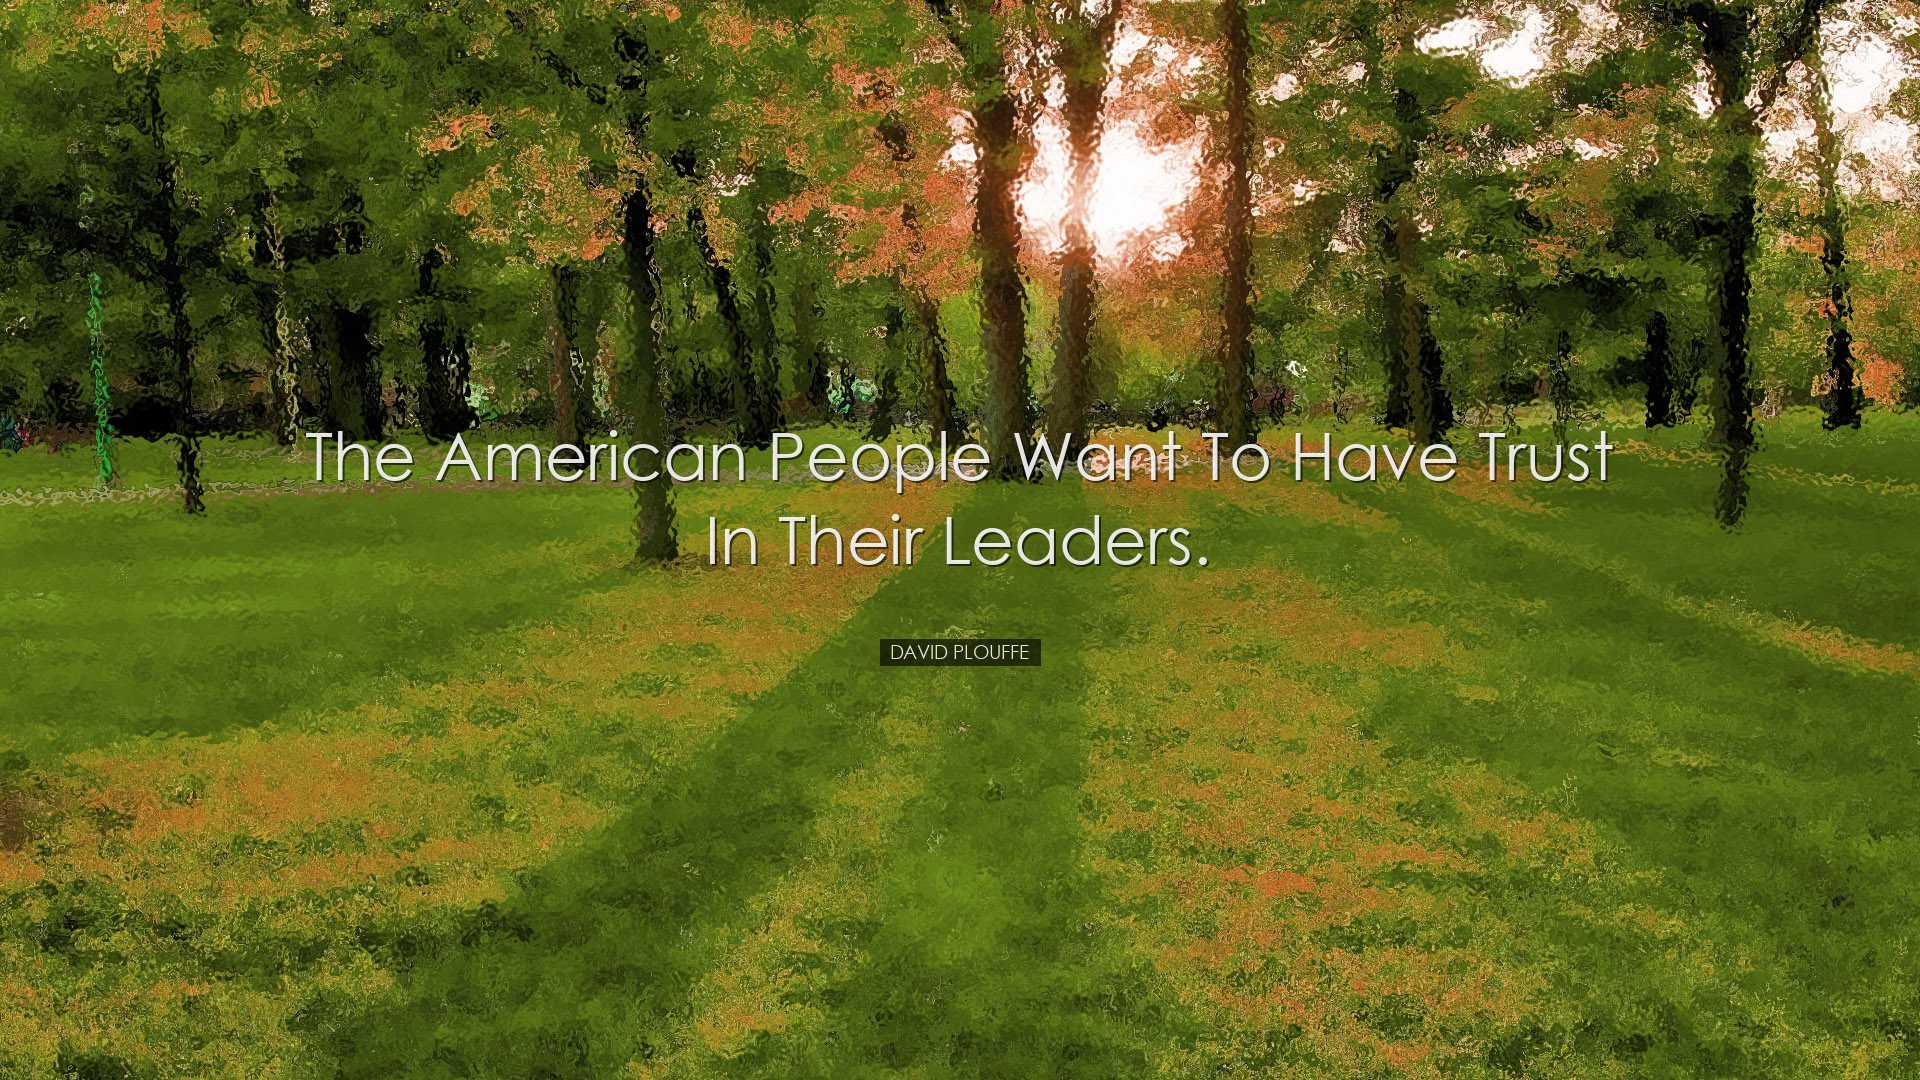 The American people want to have trust in their leaders. - David P